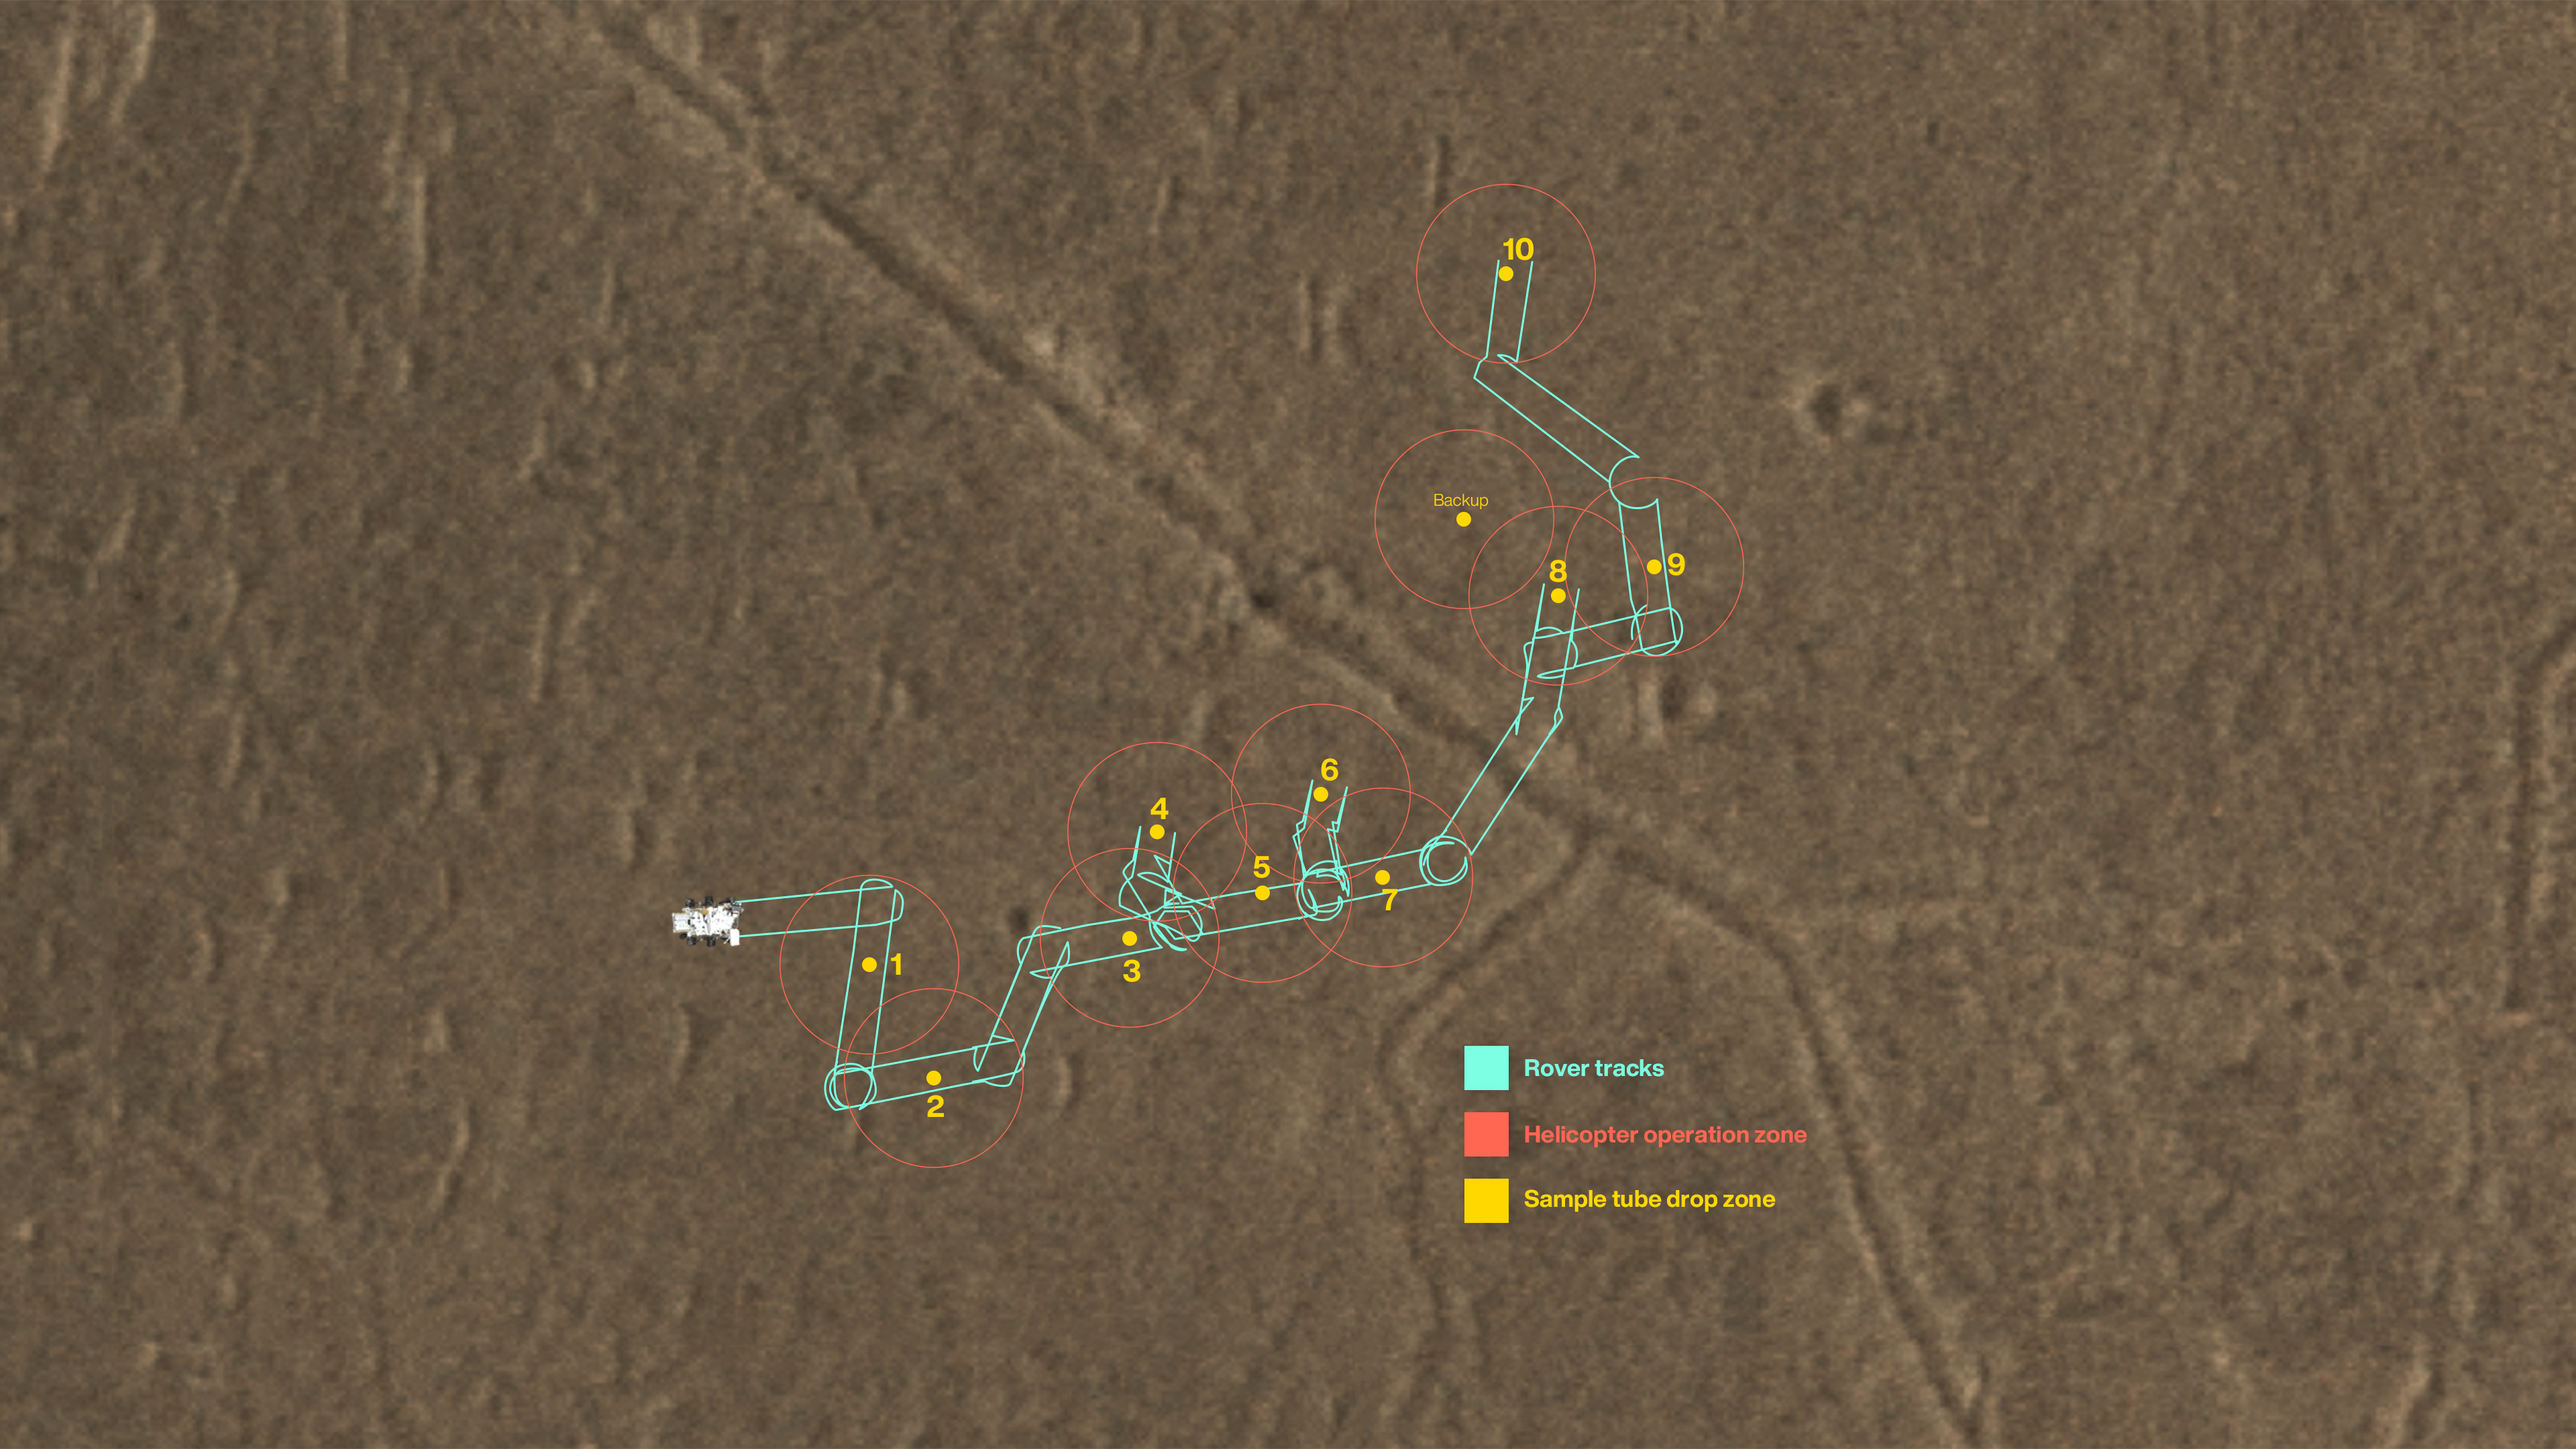 This map shows where NASA's Perseverance Mars rover will drop 10 samples that a future mission could pick up.  The orange circles represent areas where a sample recovery helicopter could safely operate to capture the sample tubes.